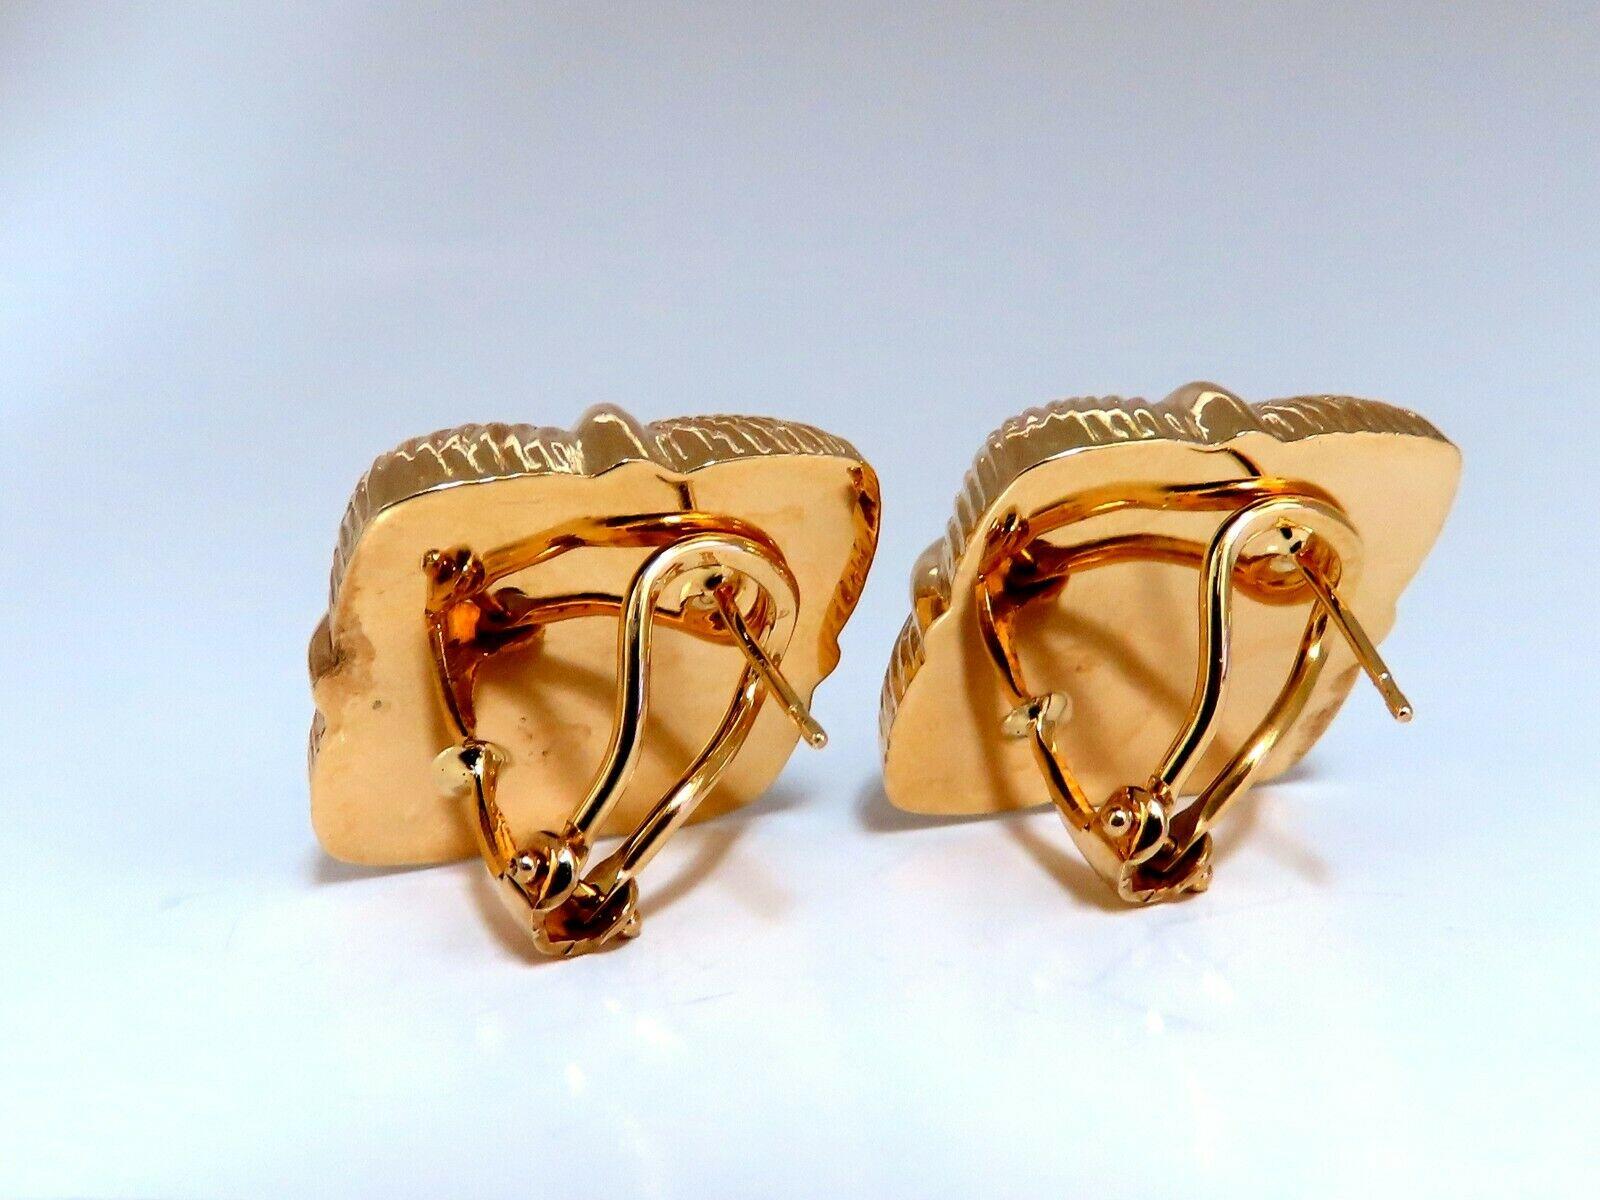 Textured Clip Earrings

Measurements of Earrings:

Measurements: 

.86 x .85 Inch

Depth: .23inch

Comfortable Omega Clips

9.3 grams / 14kt. Yellow Gold

Earrings are gorgeous made